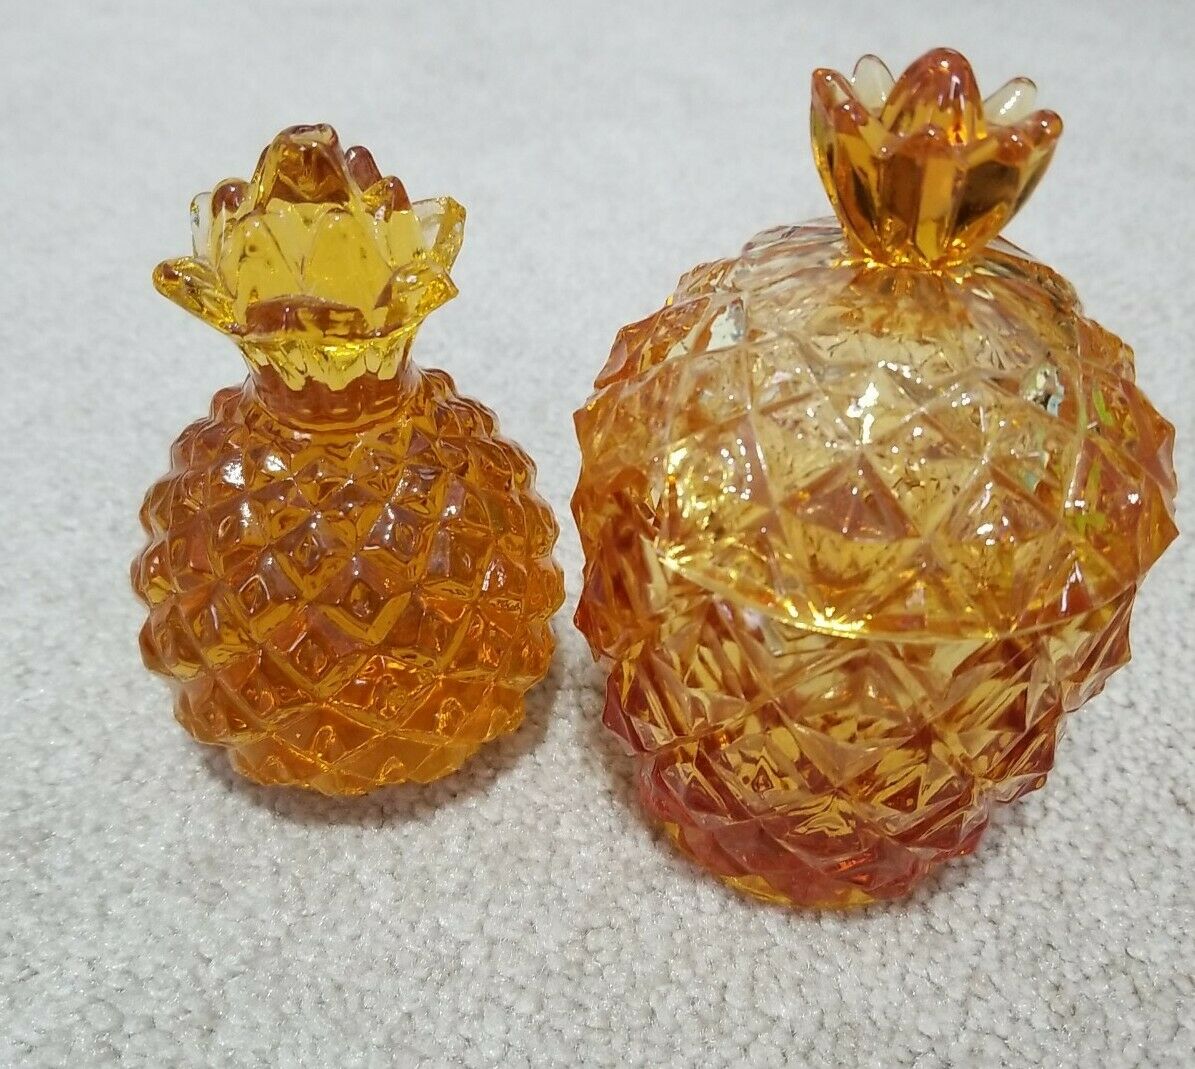 Pineapple Paperweight And Pineapple Sugar Bowl